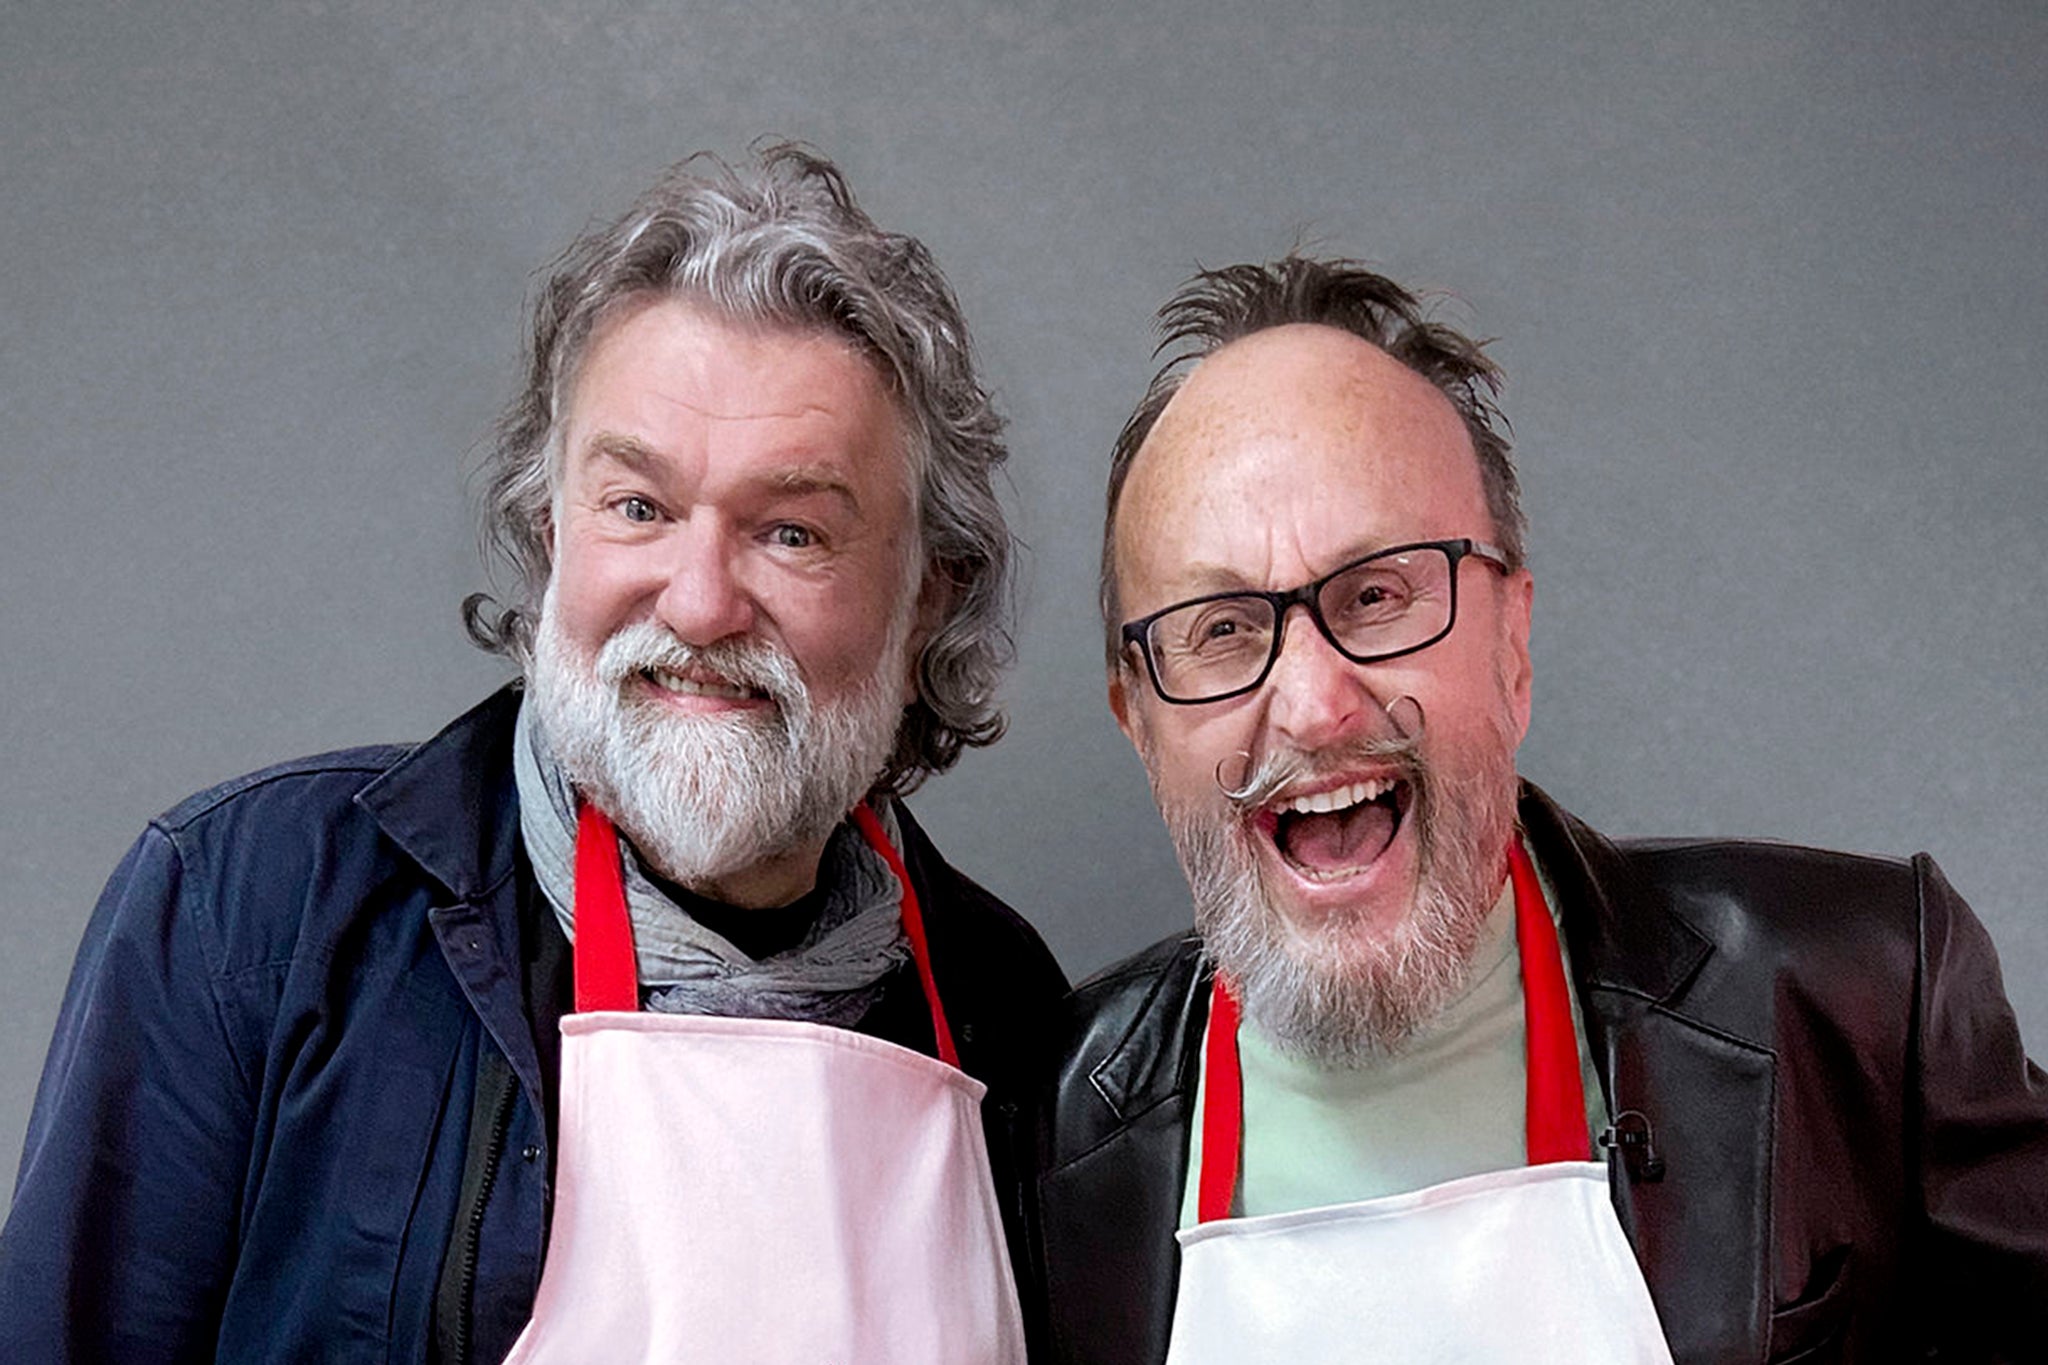 Hairy Bikers Simon King and Dave Myers